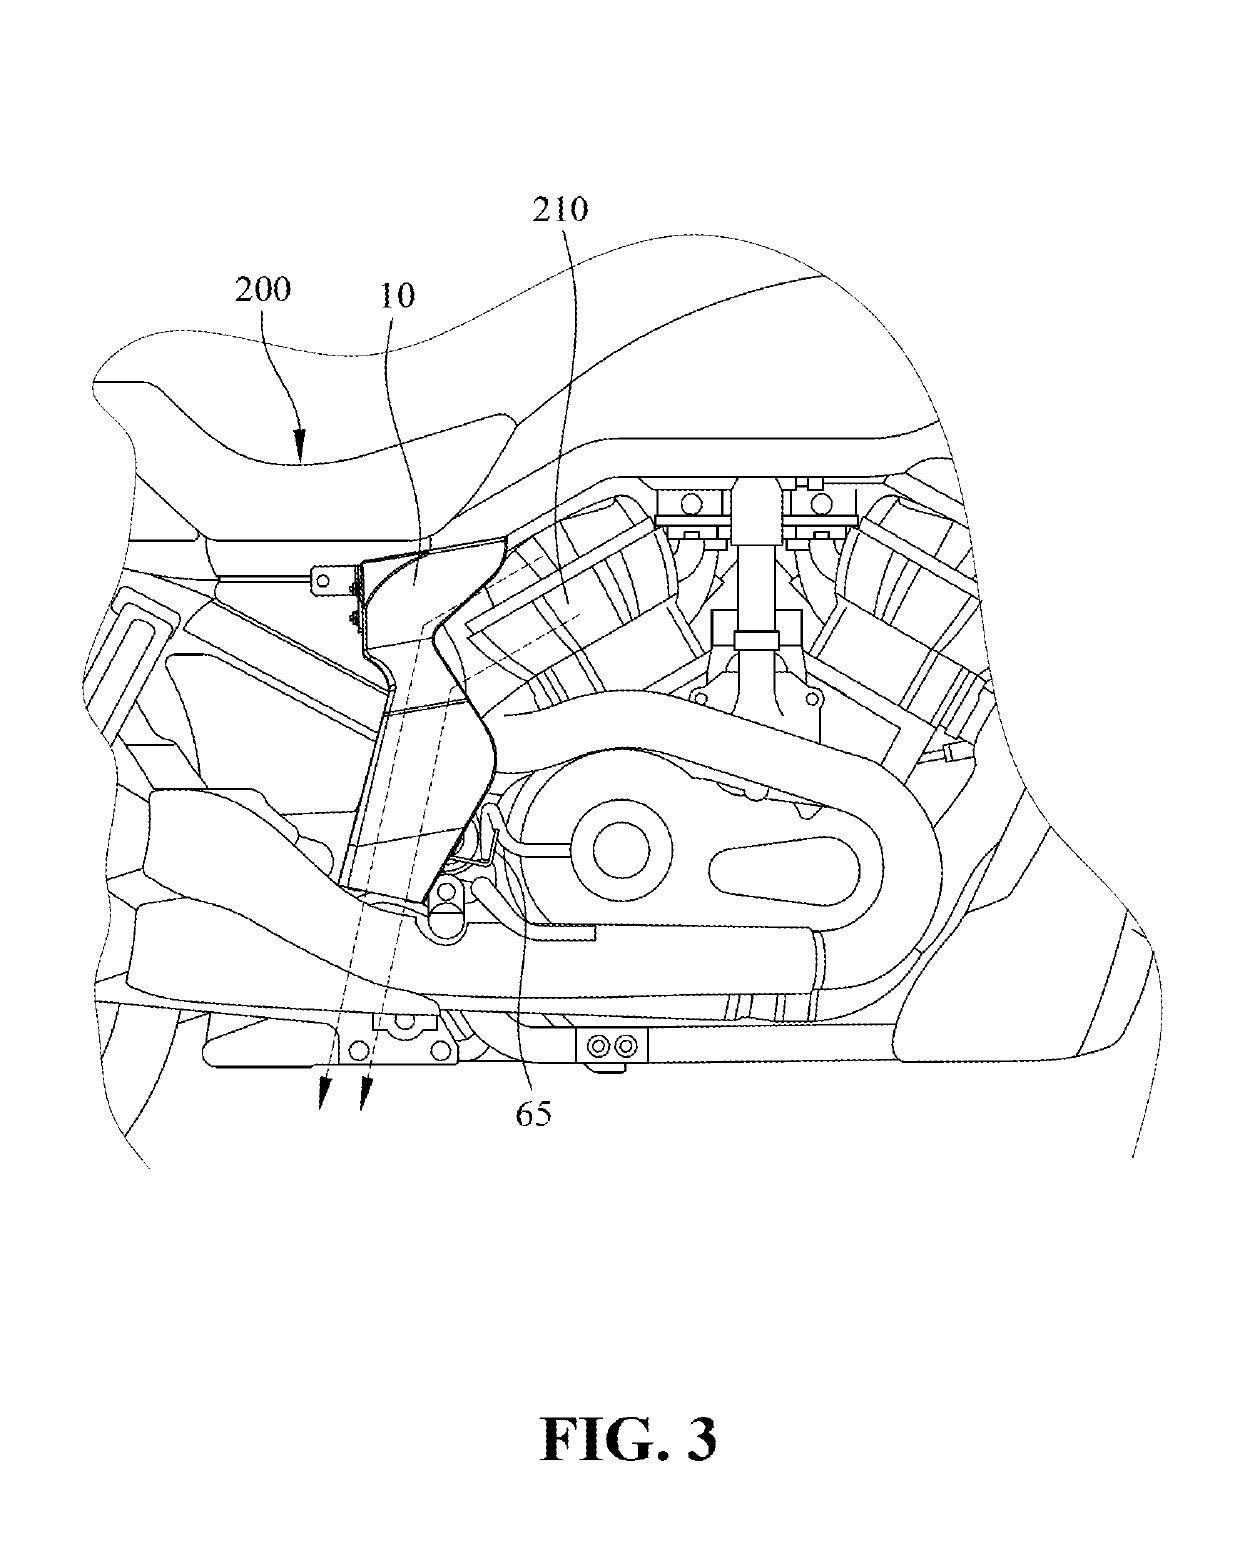 Heat dissipation device for an engine of a motorcycle